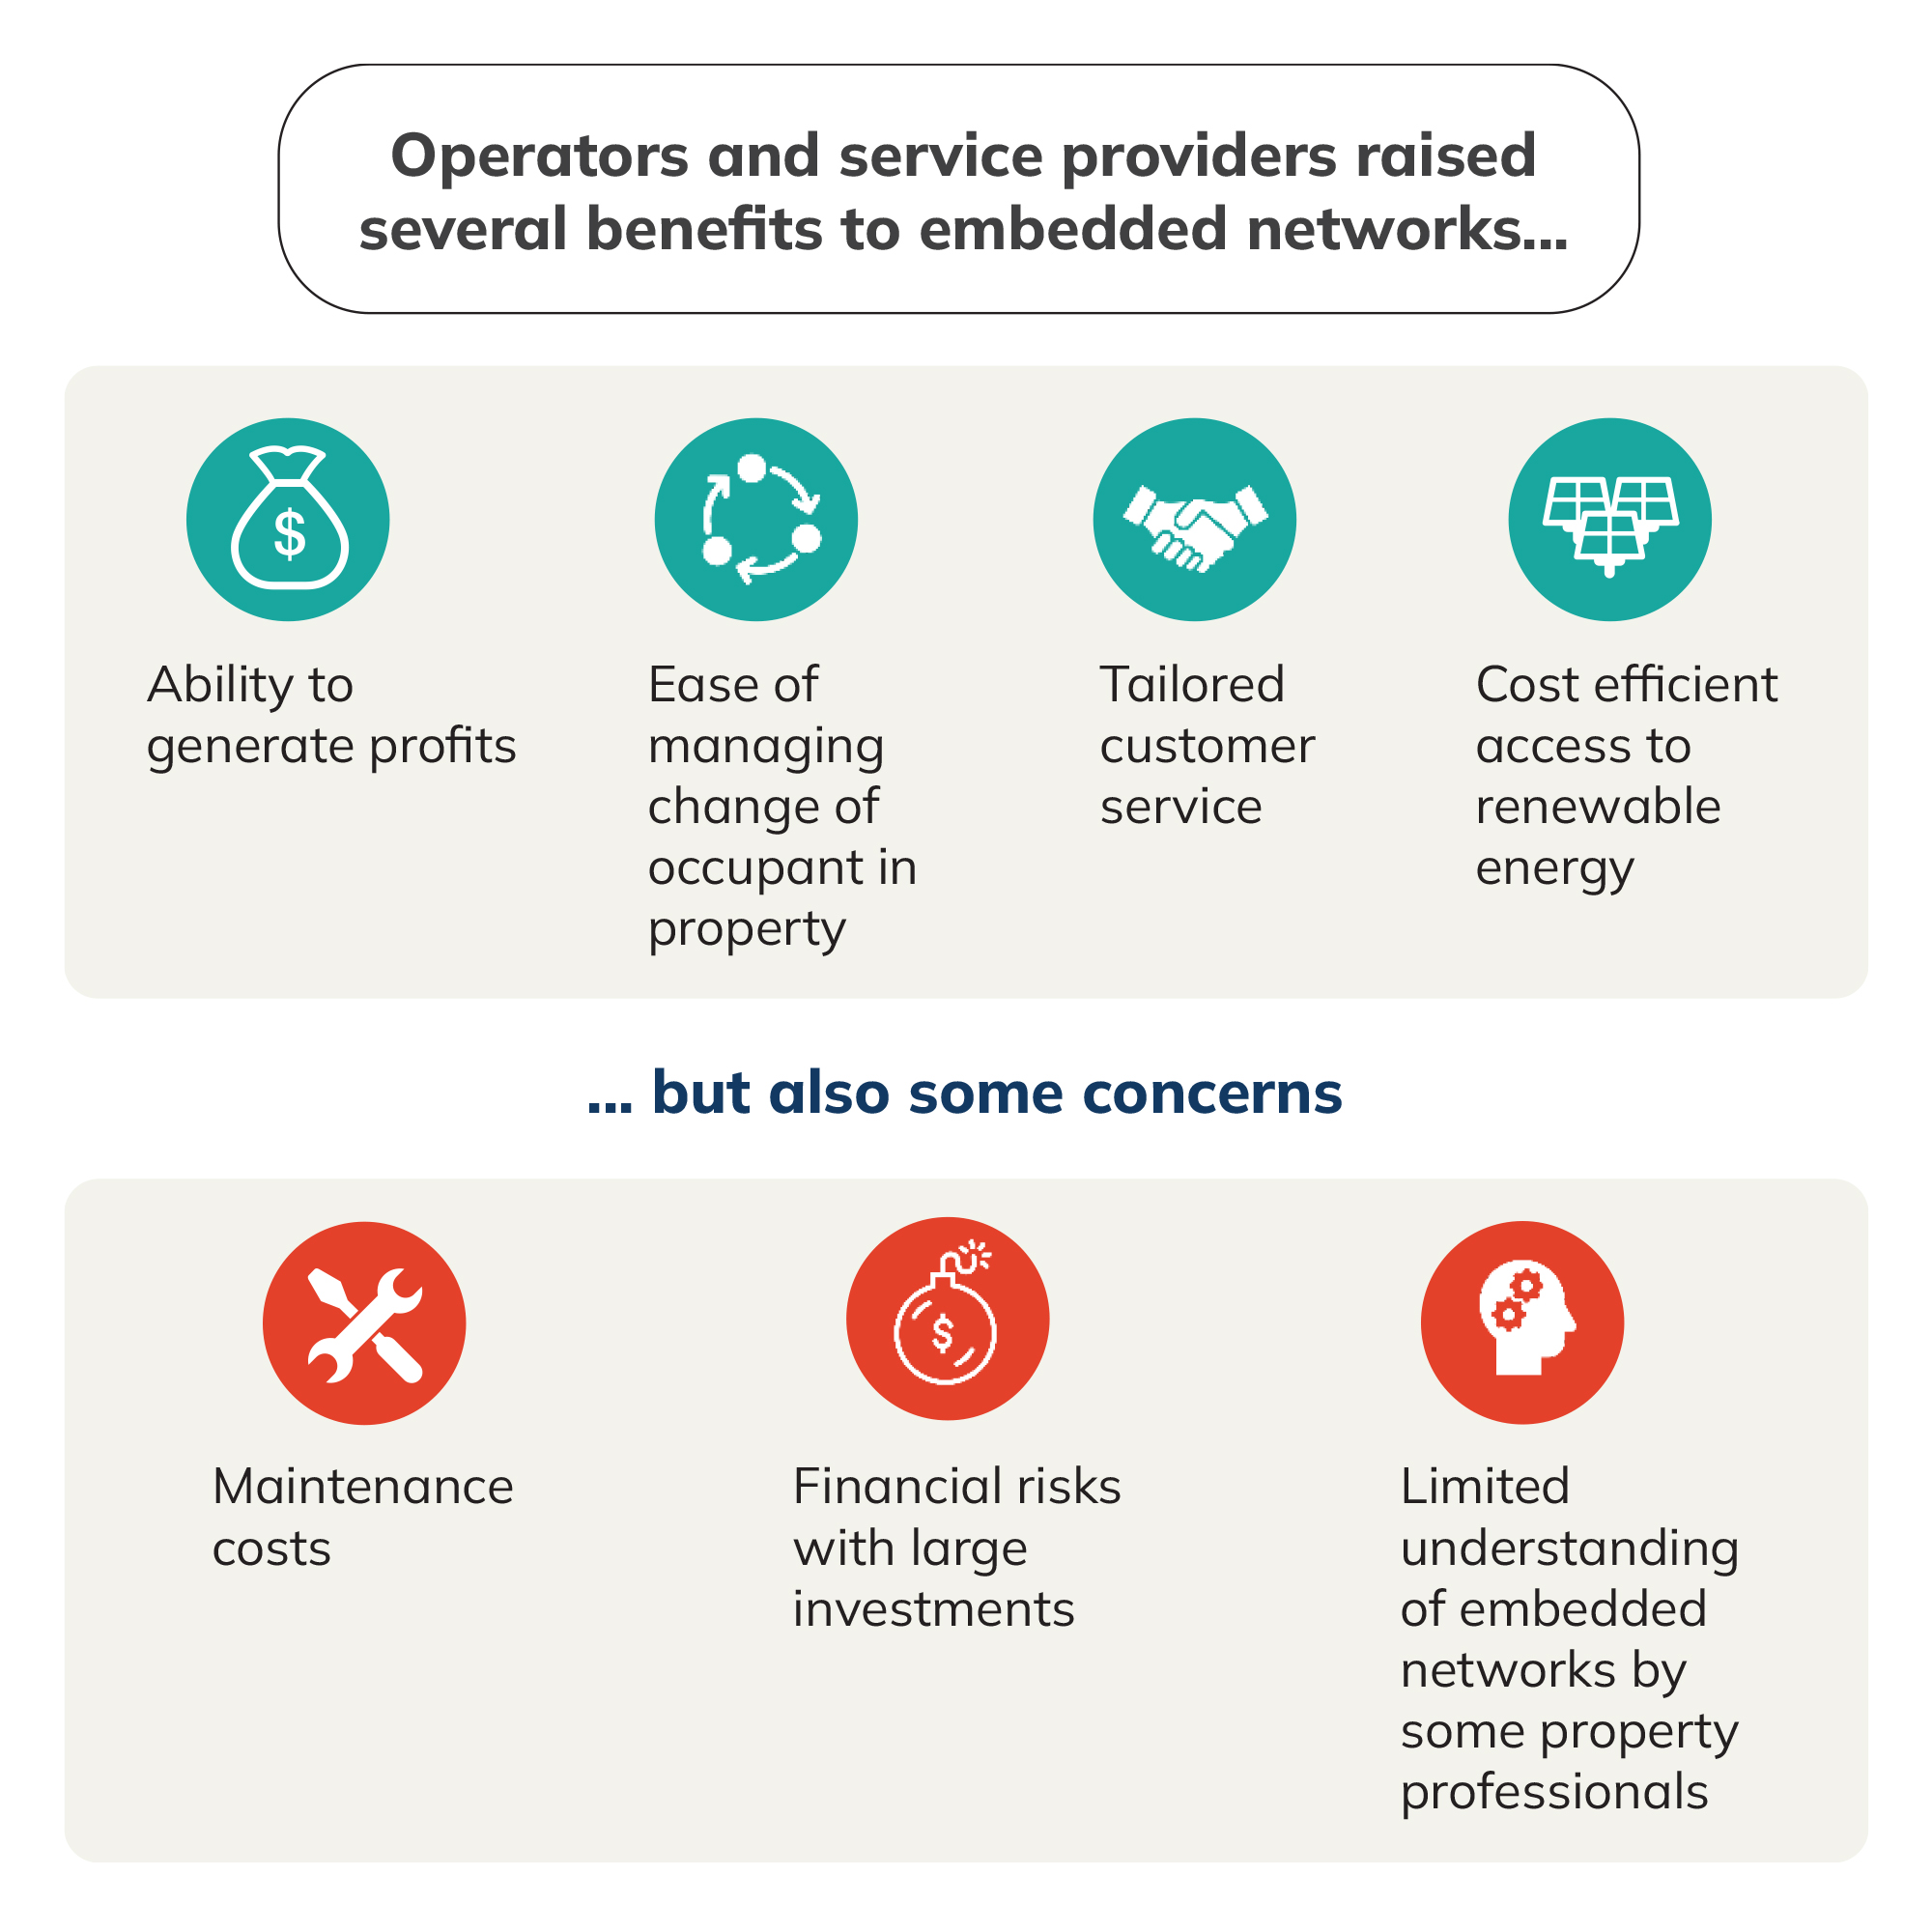 Network Operators and Service Providers 1 - Operators and service providers raised several benefits to embedded networks